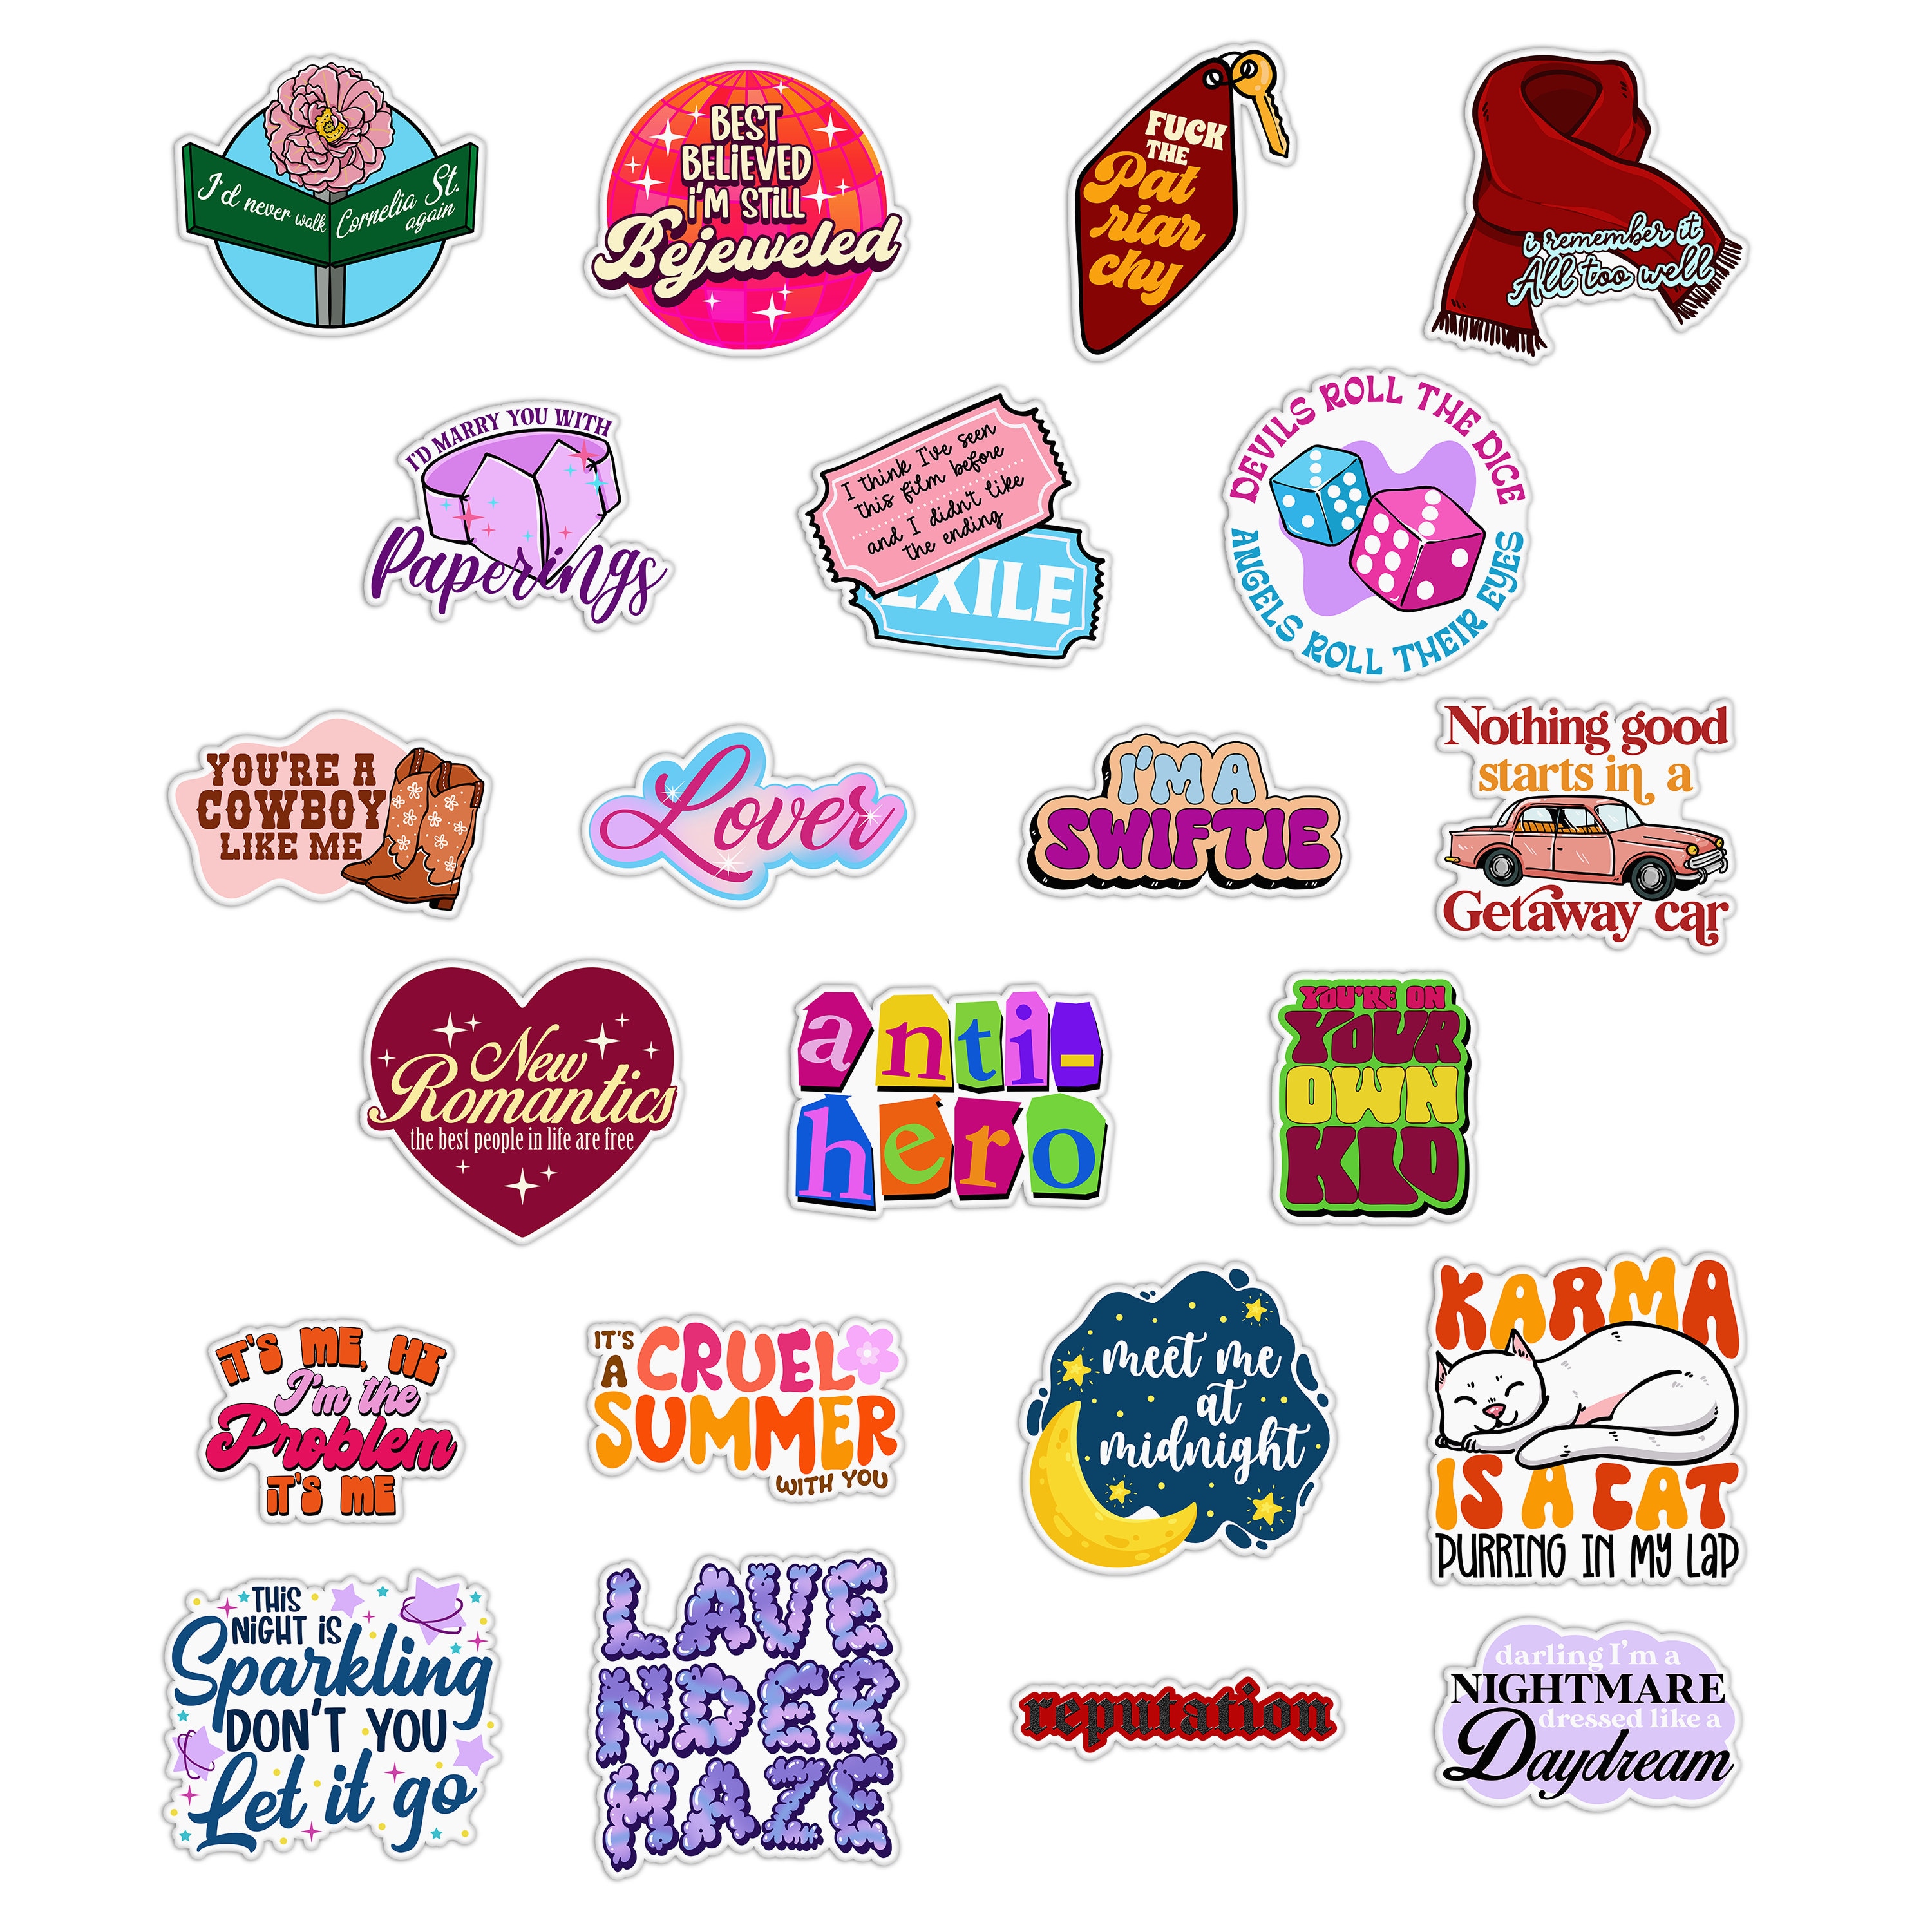 Am i a person or taylor swift lyrics? – bejeweled stickers